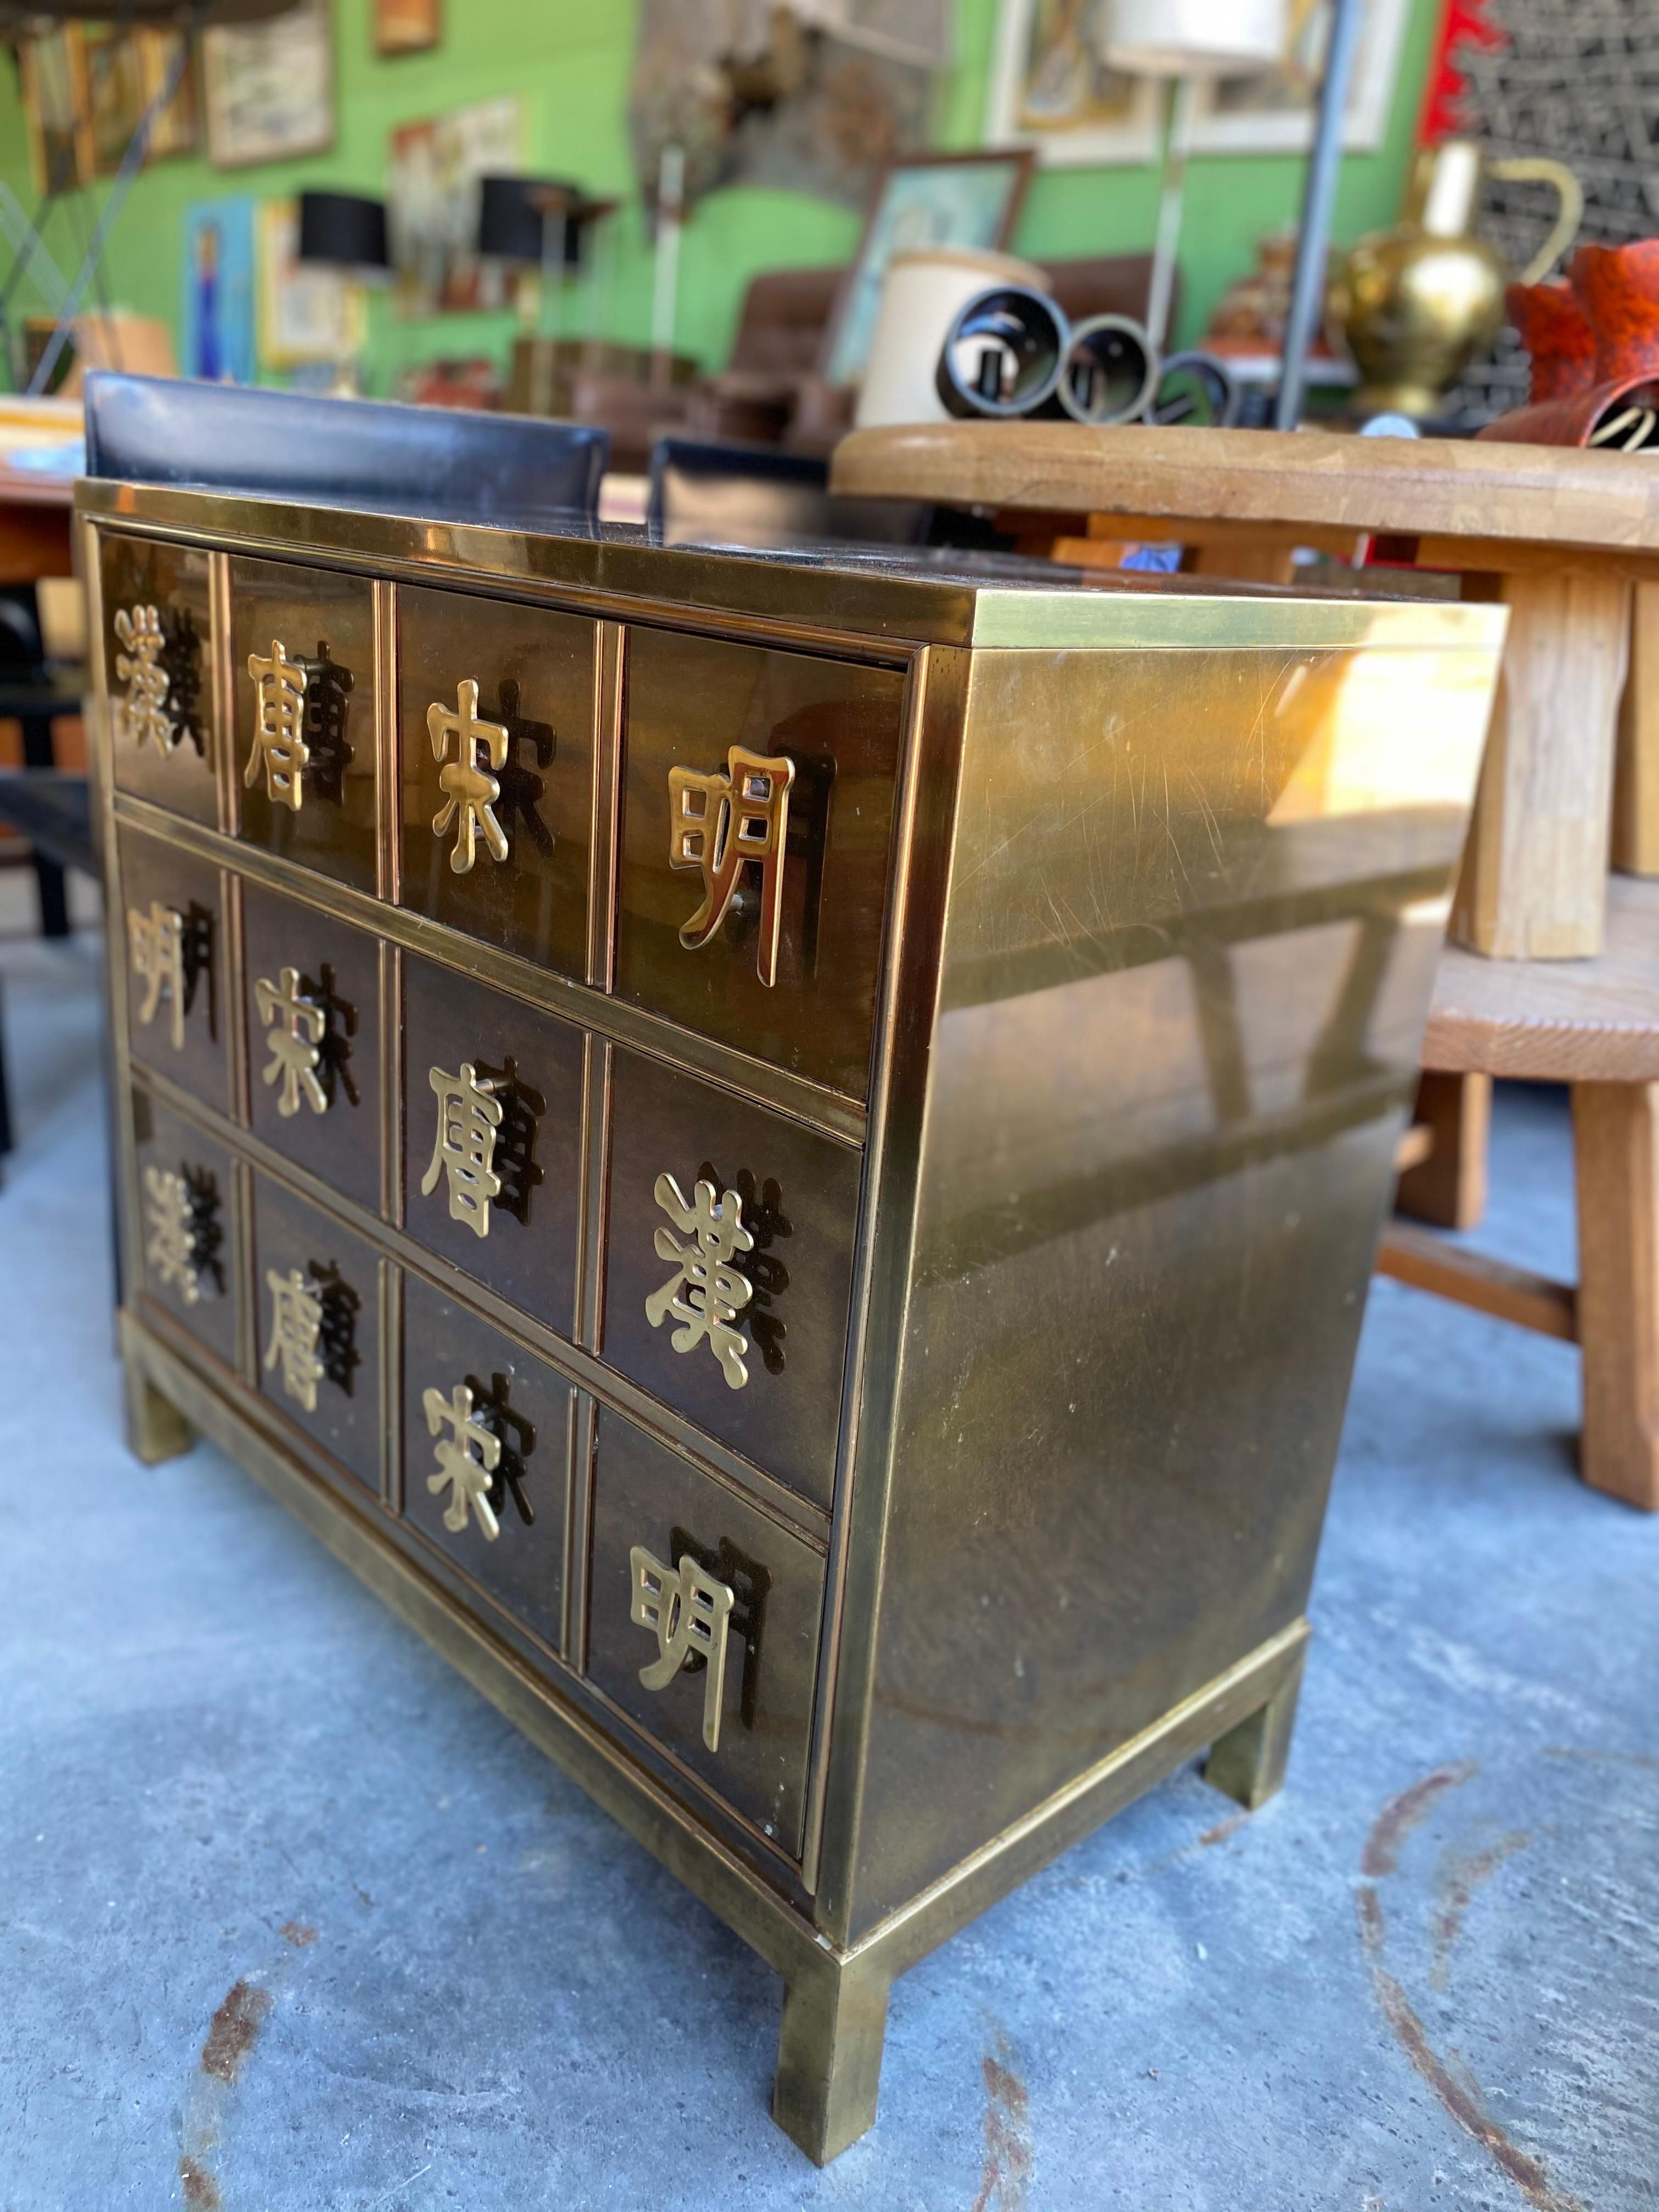 Beautiful dynasty brass chest of drawers by Mastercraft. The chest includes pulls designed with Chinese characters which represent the four dynasties. Features three drawers and is in good overall vintage condition. Normal wear as shown in images.